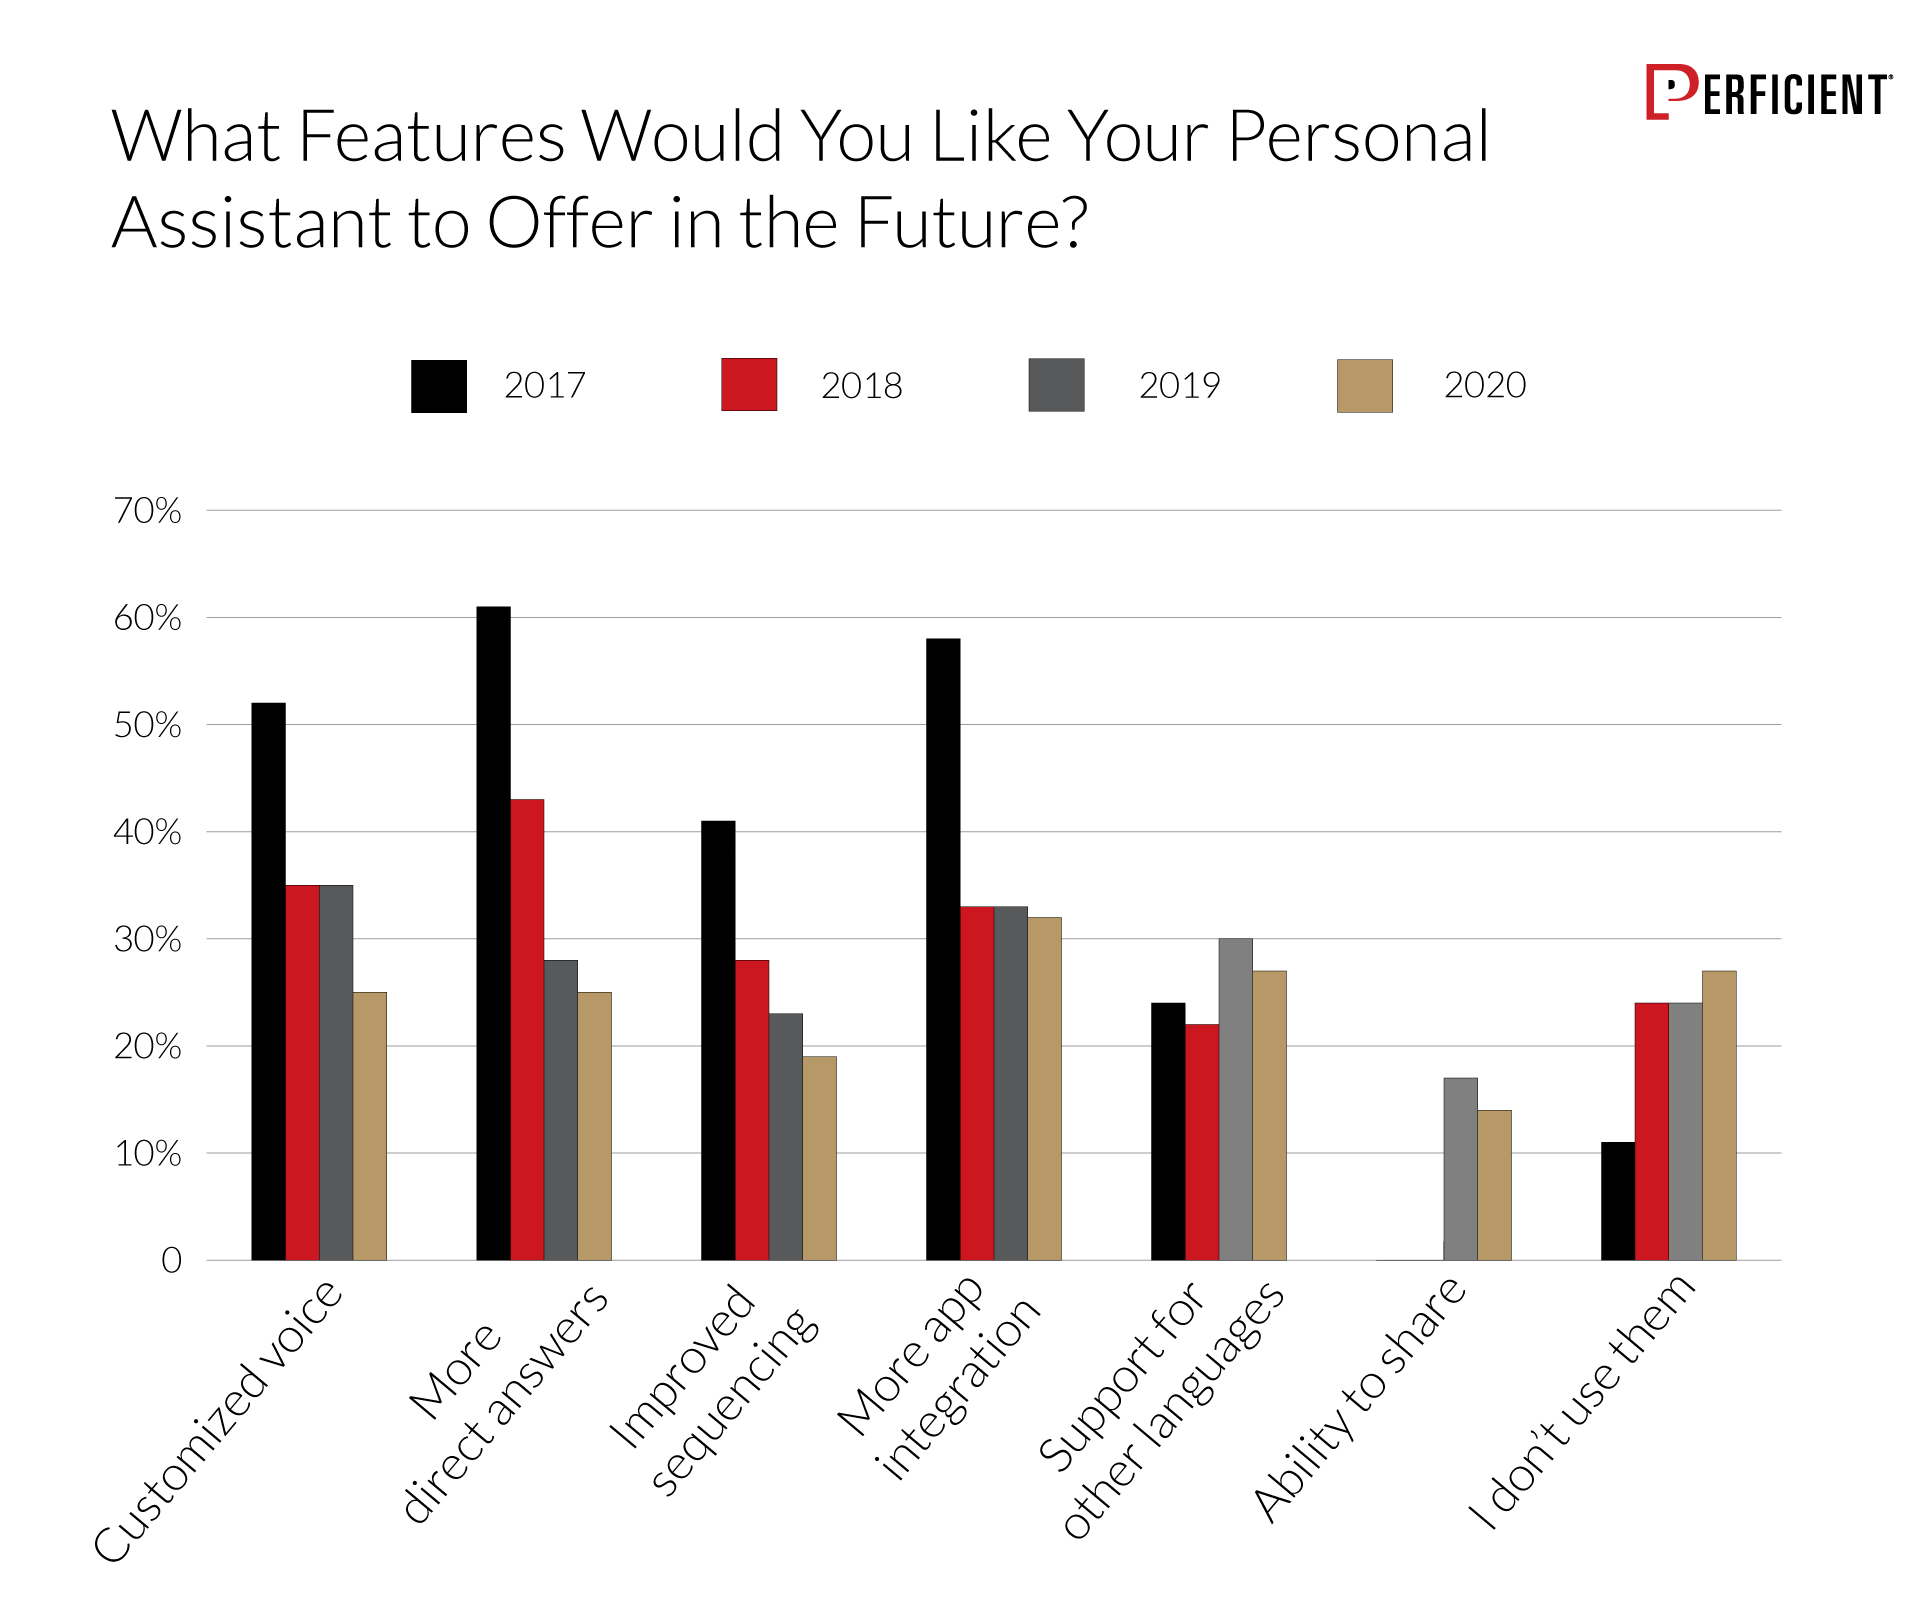 Chart shows what features users would like personal assistant to offer in the future